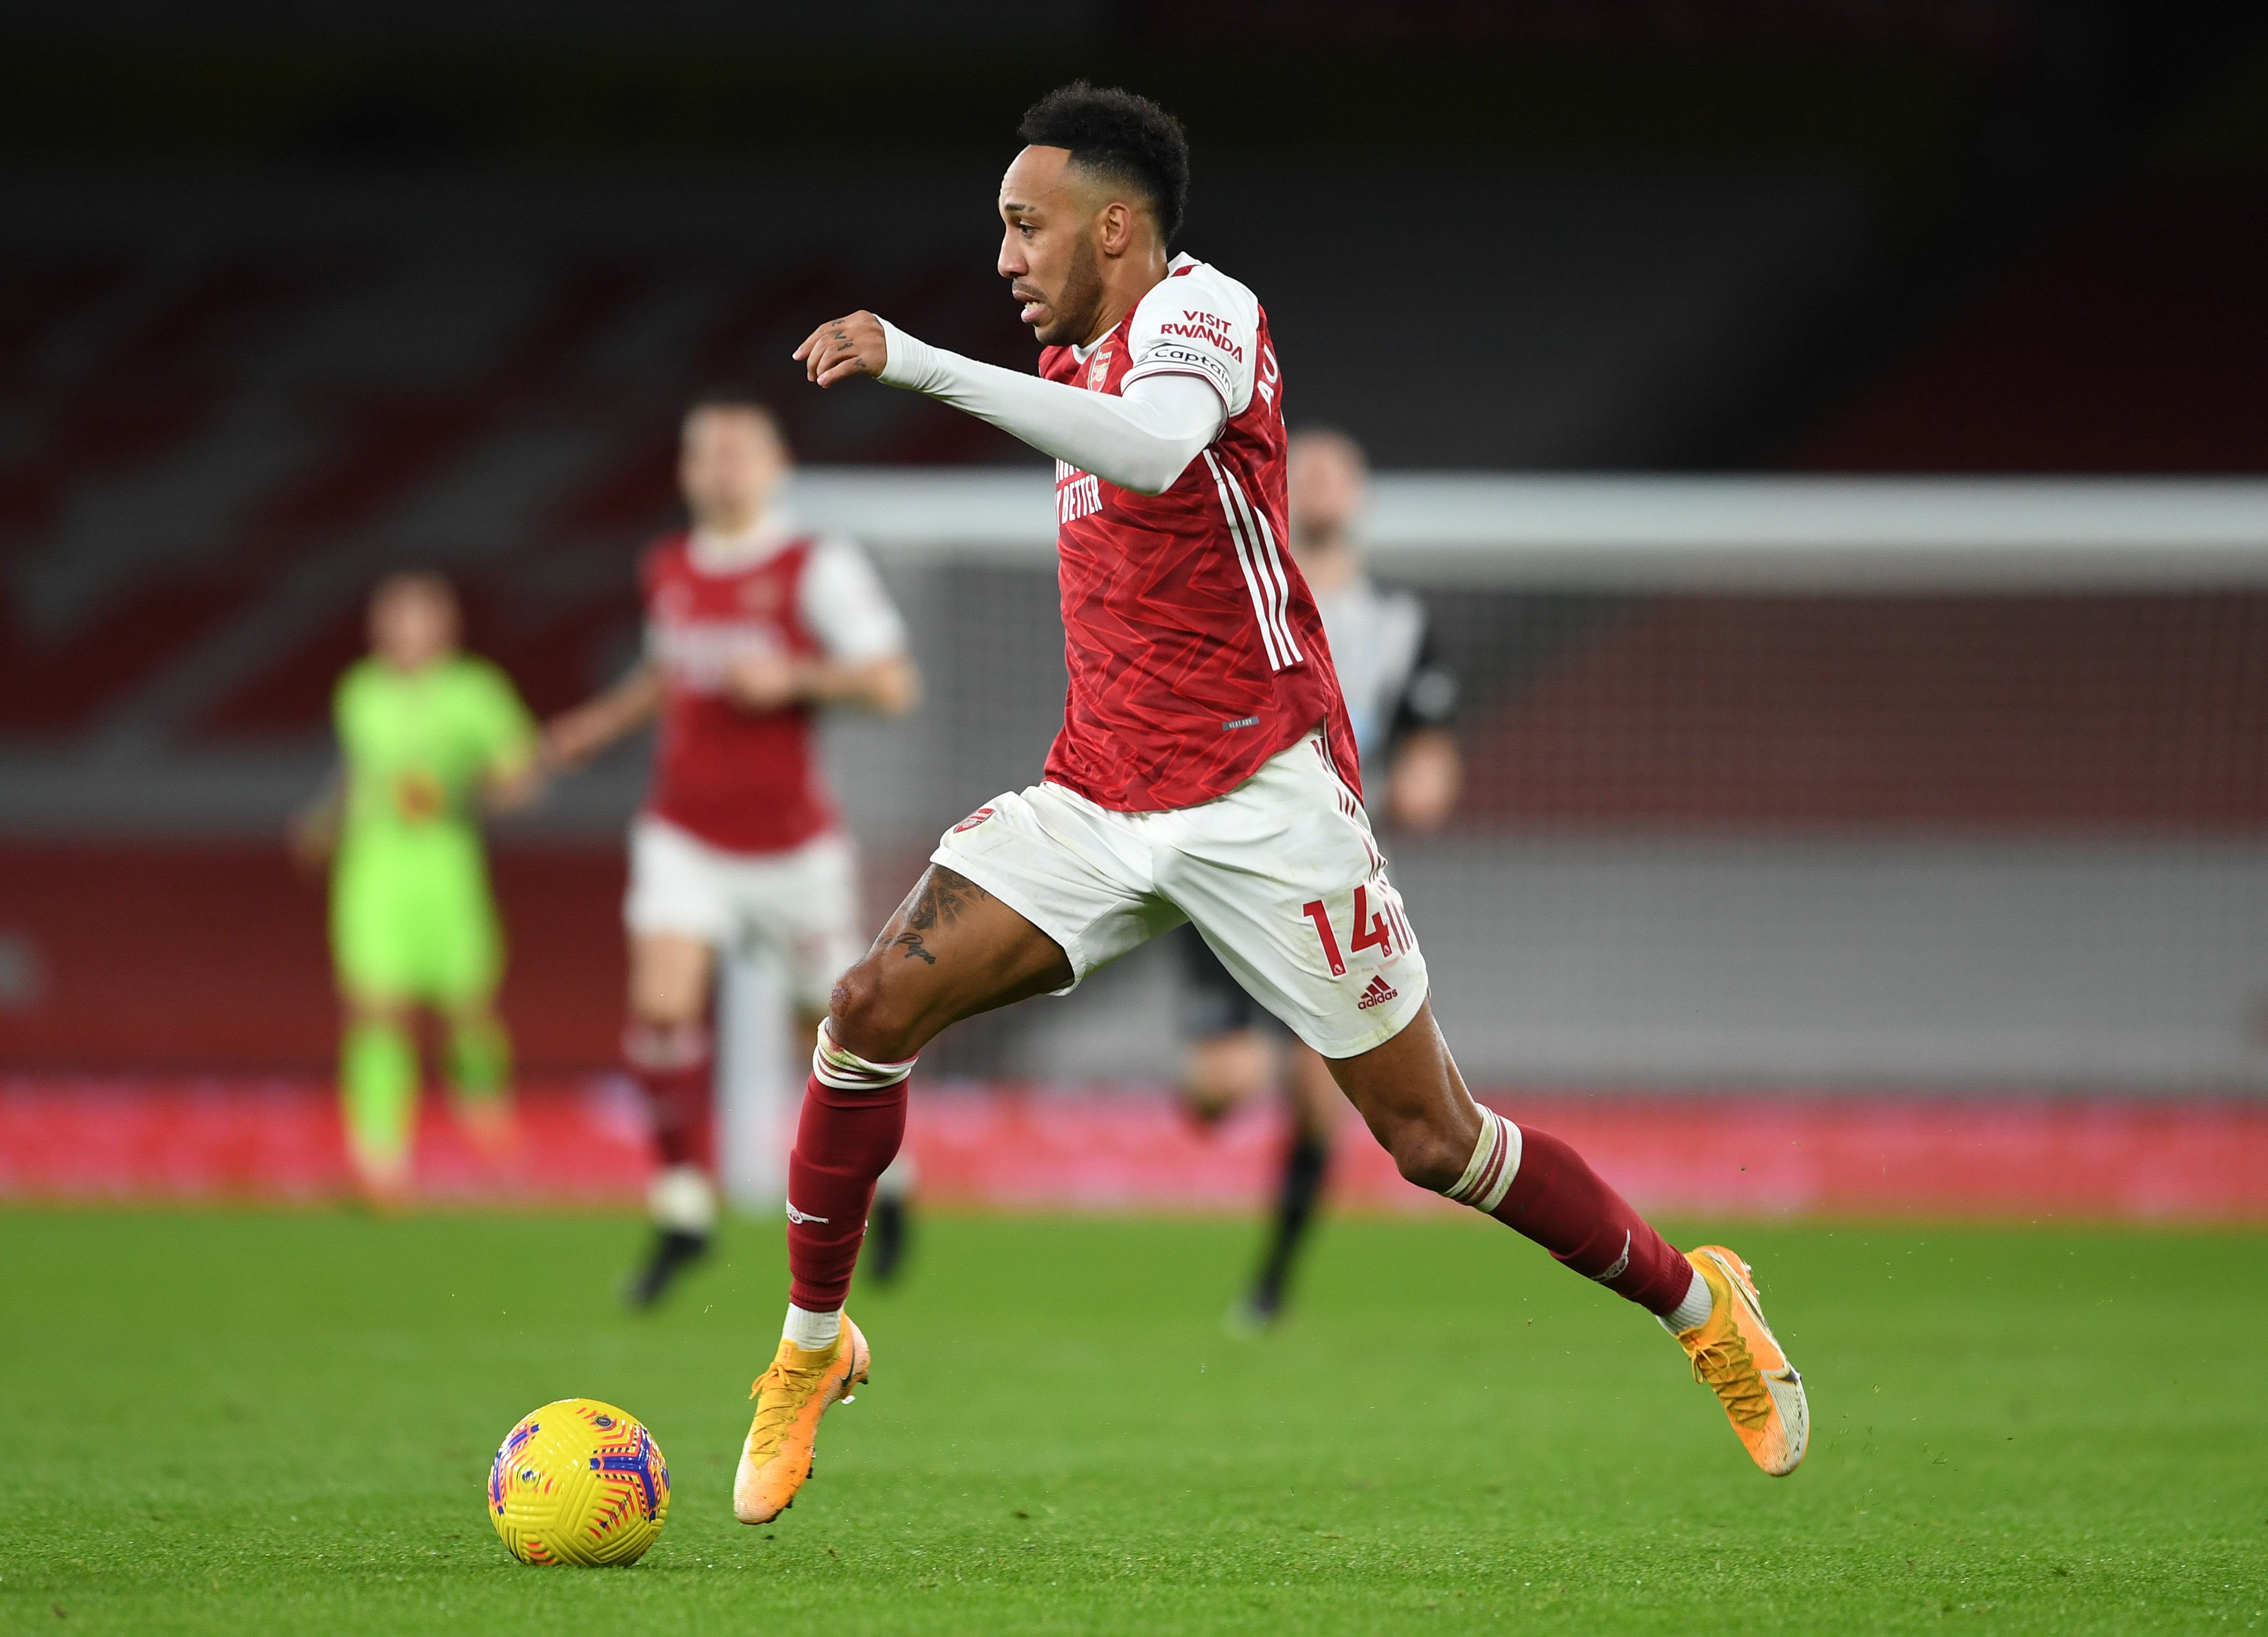 Pierre-Emerick Aubameyang is not fit for the game at St Mary’s